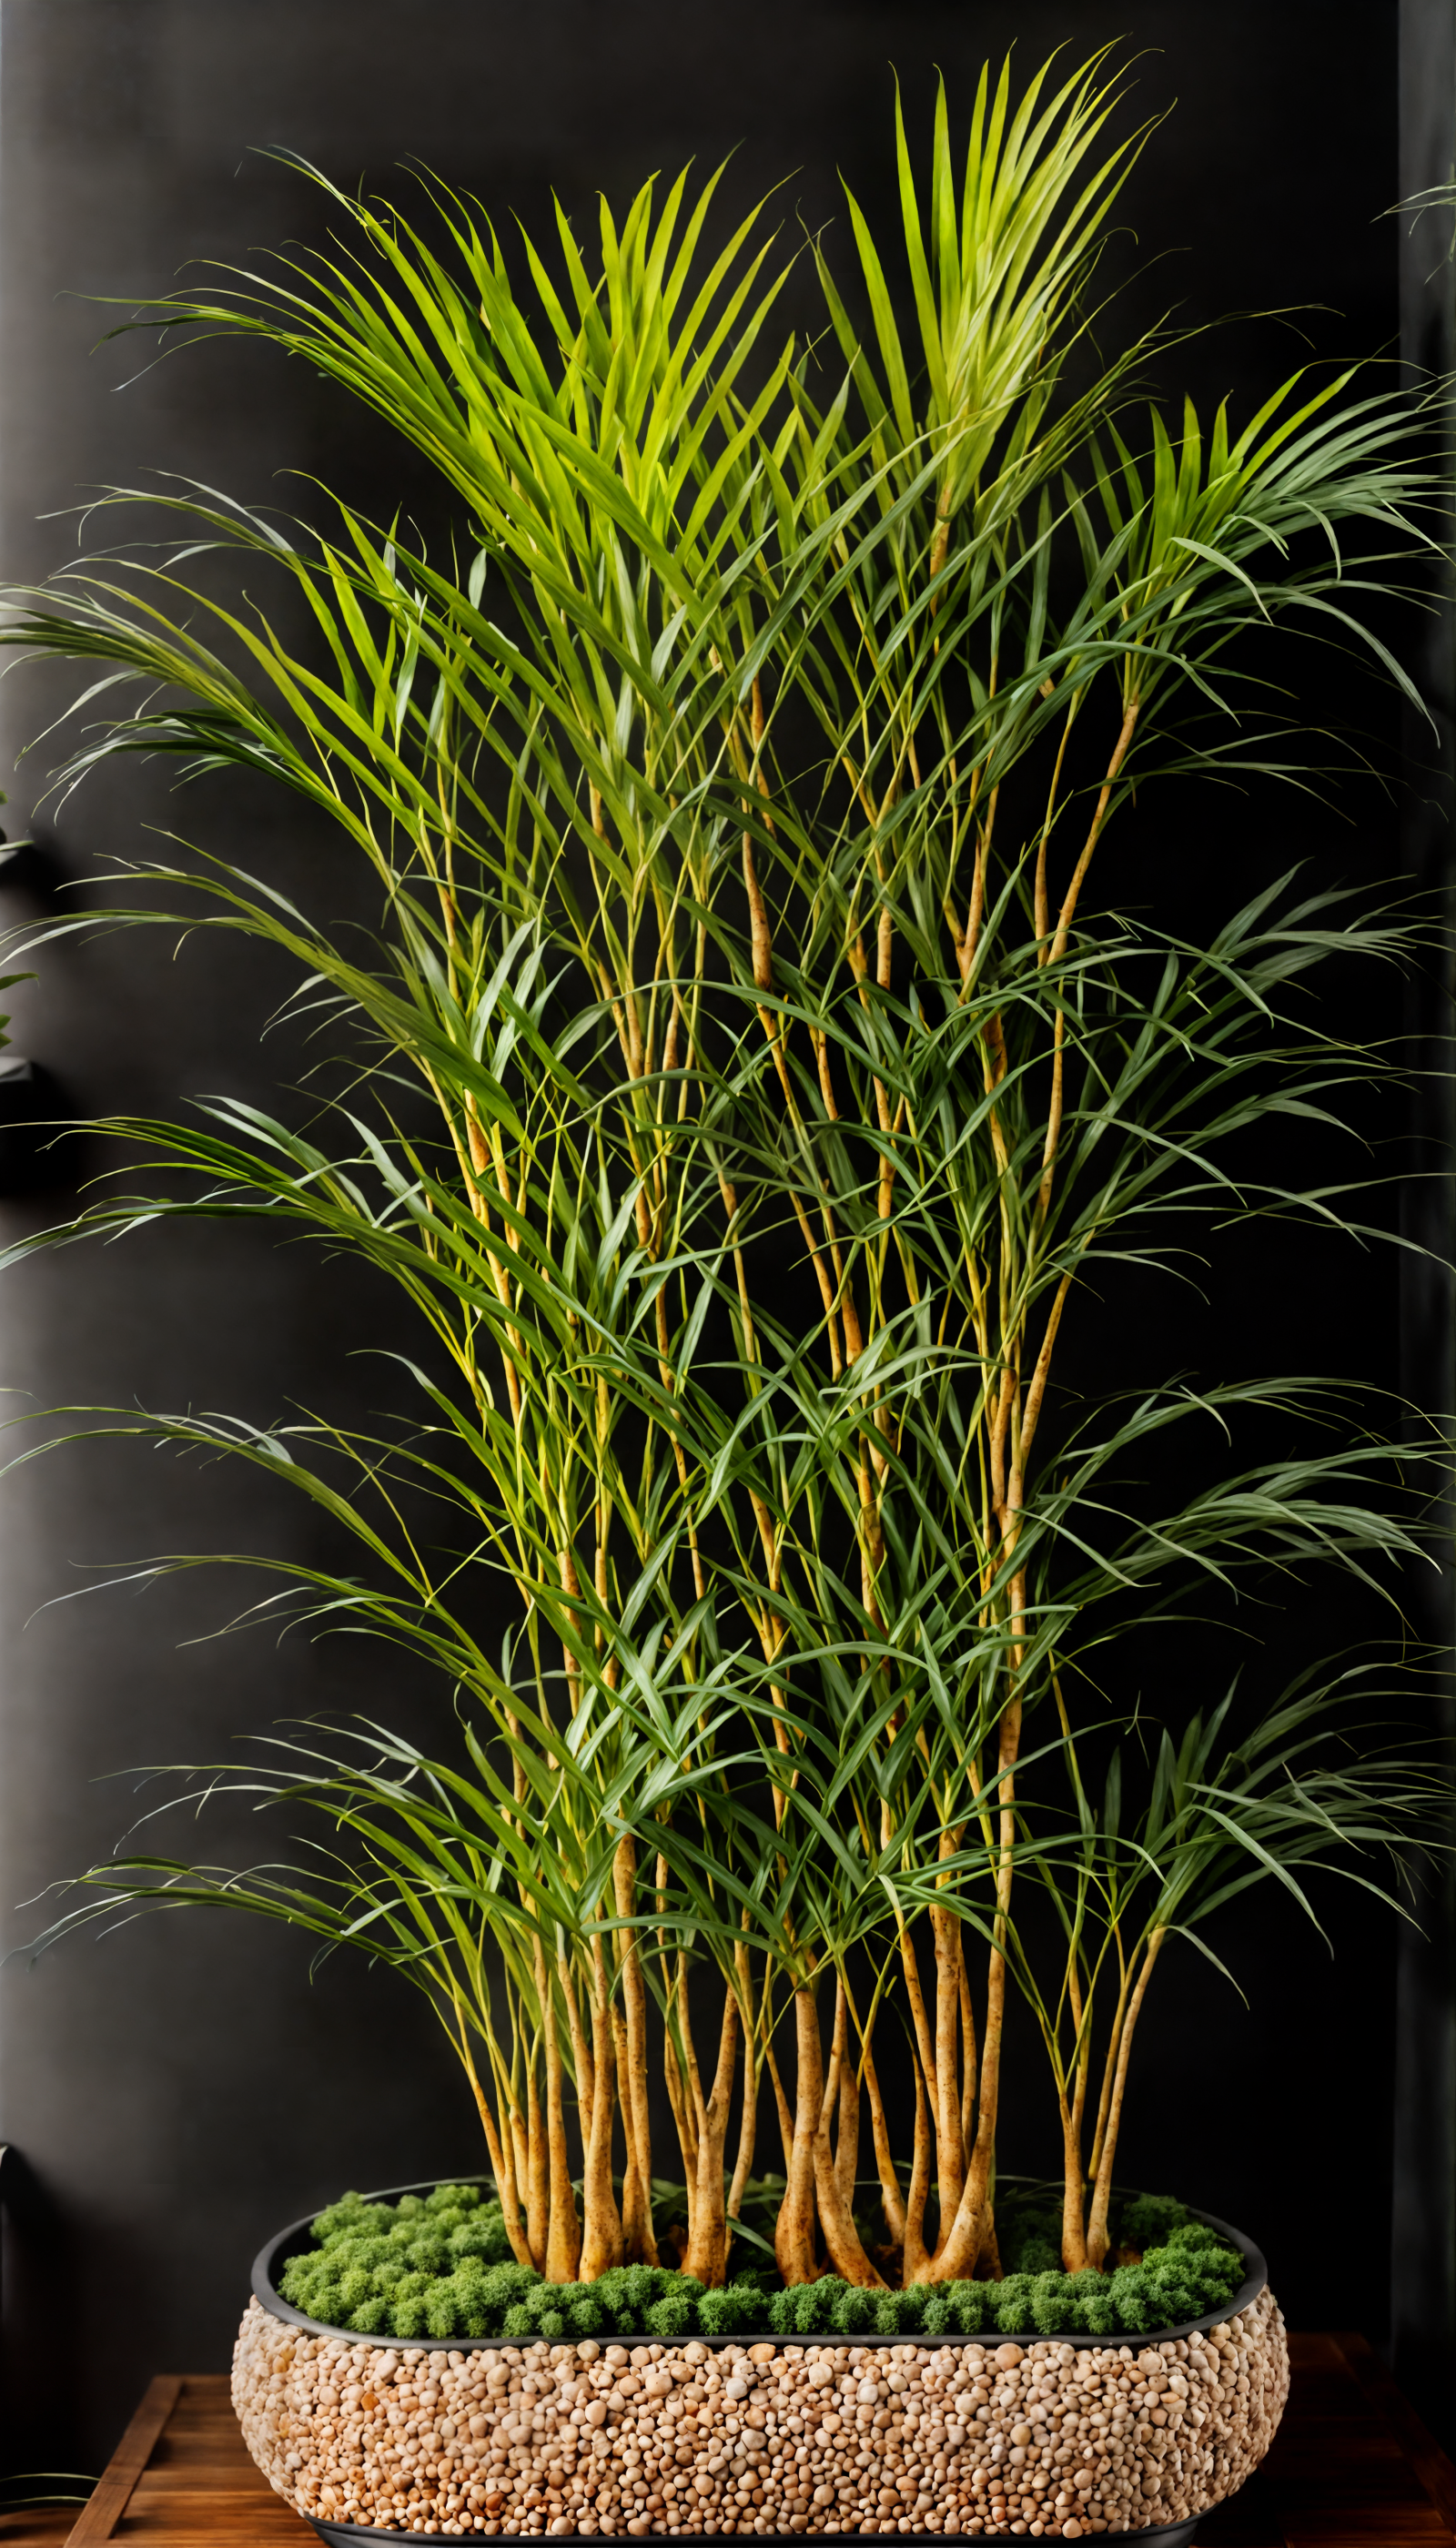 Dypsis lutescens (Areca Palm) in a planter on a wooden table, with clear lighting and a dark background.